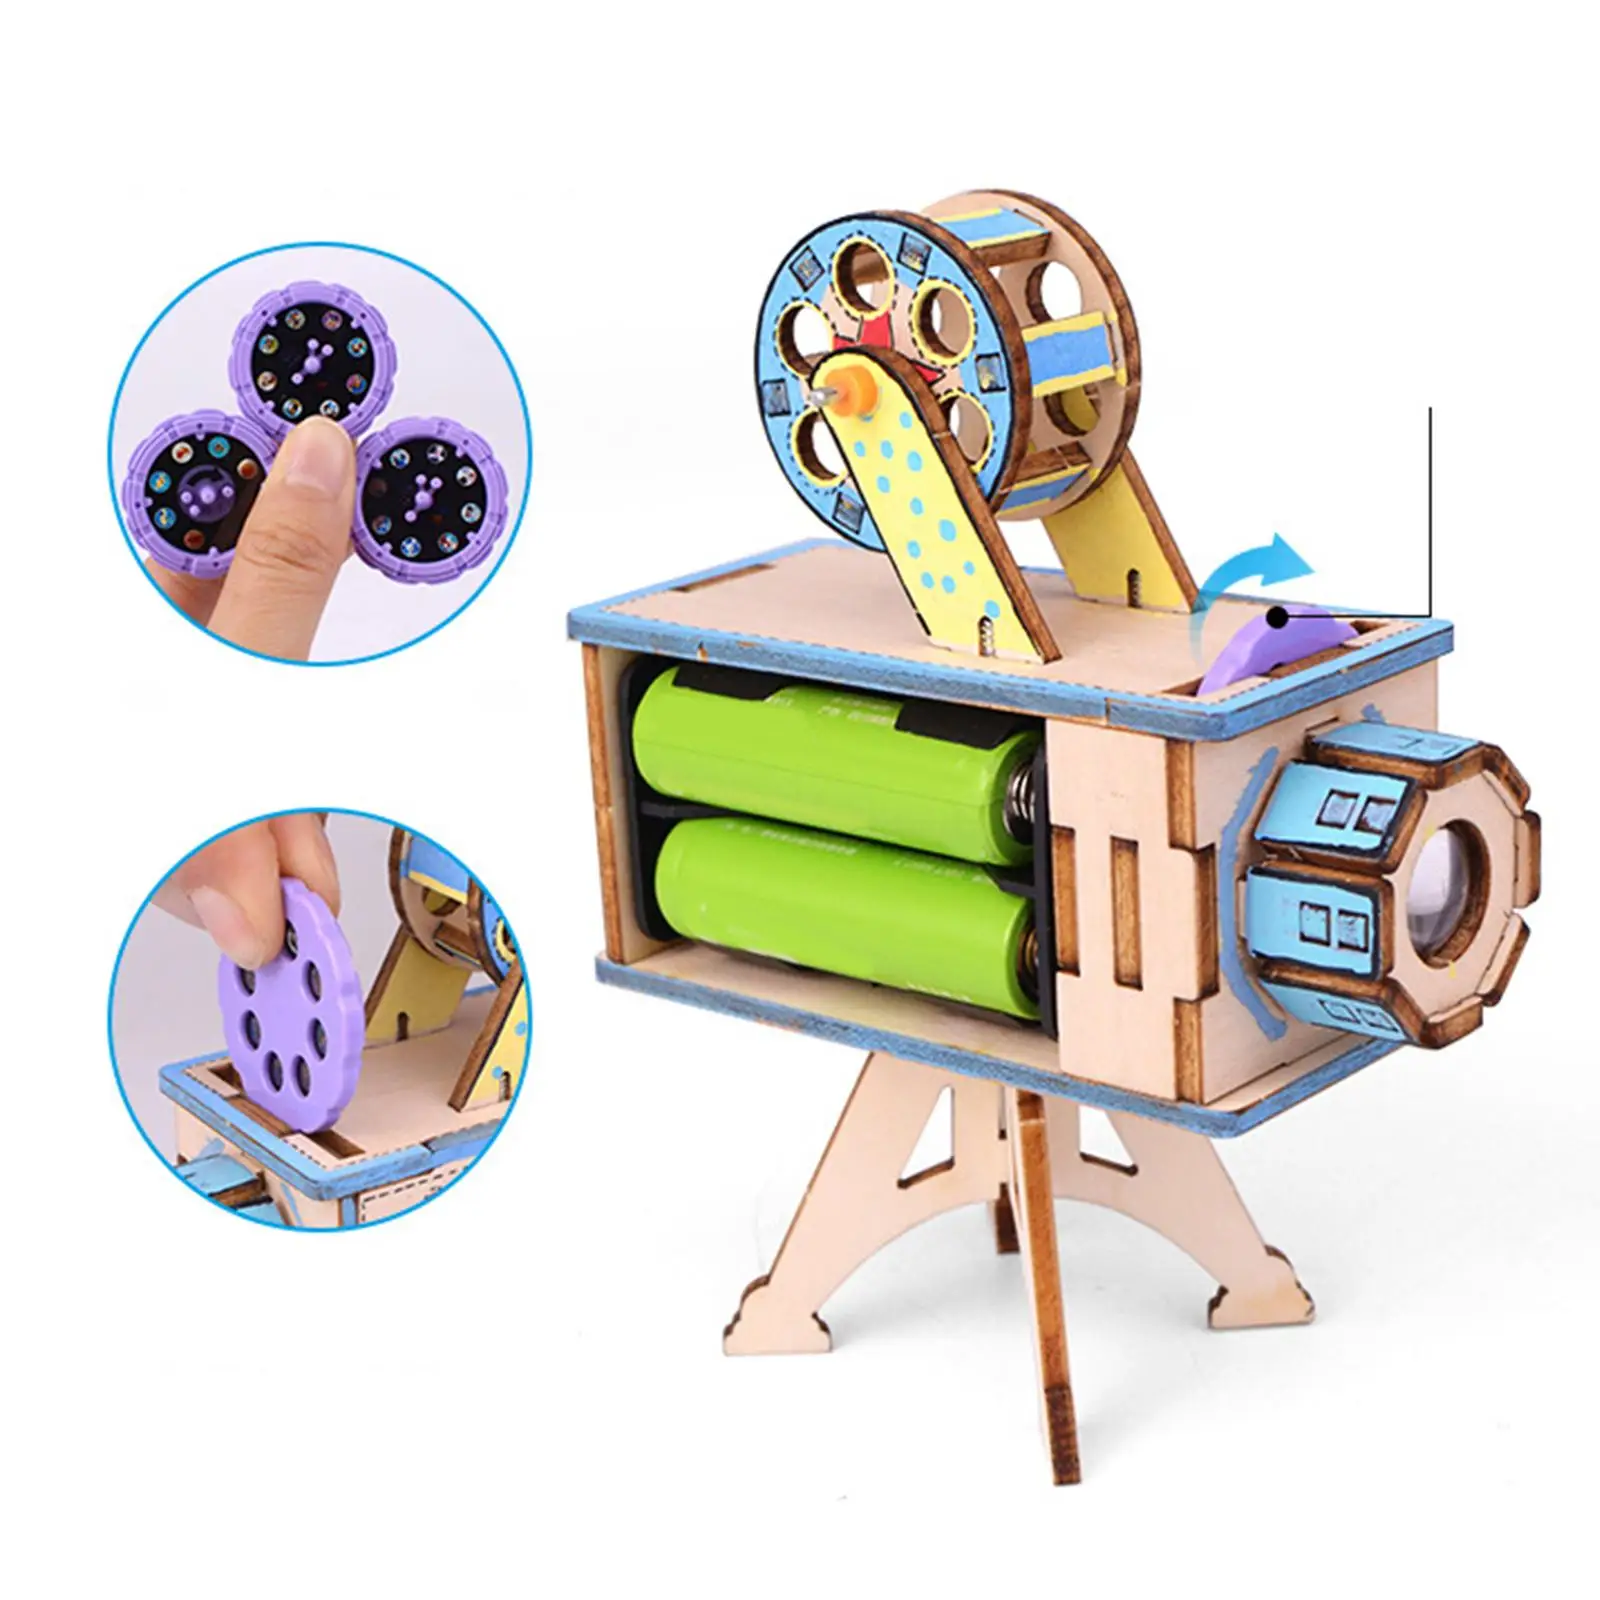 Projector 3d Puzzle Developing Intelligent Engineering Toys For Teens Birthday Gifts